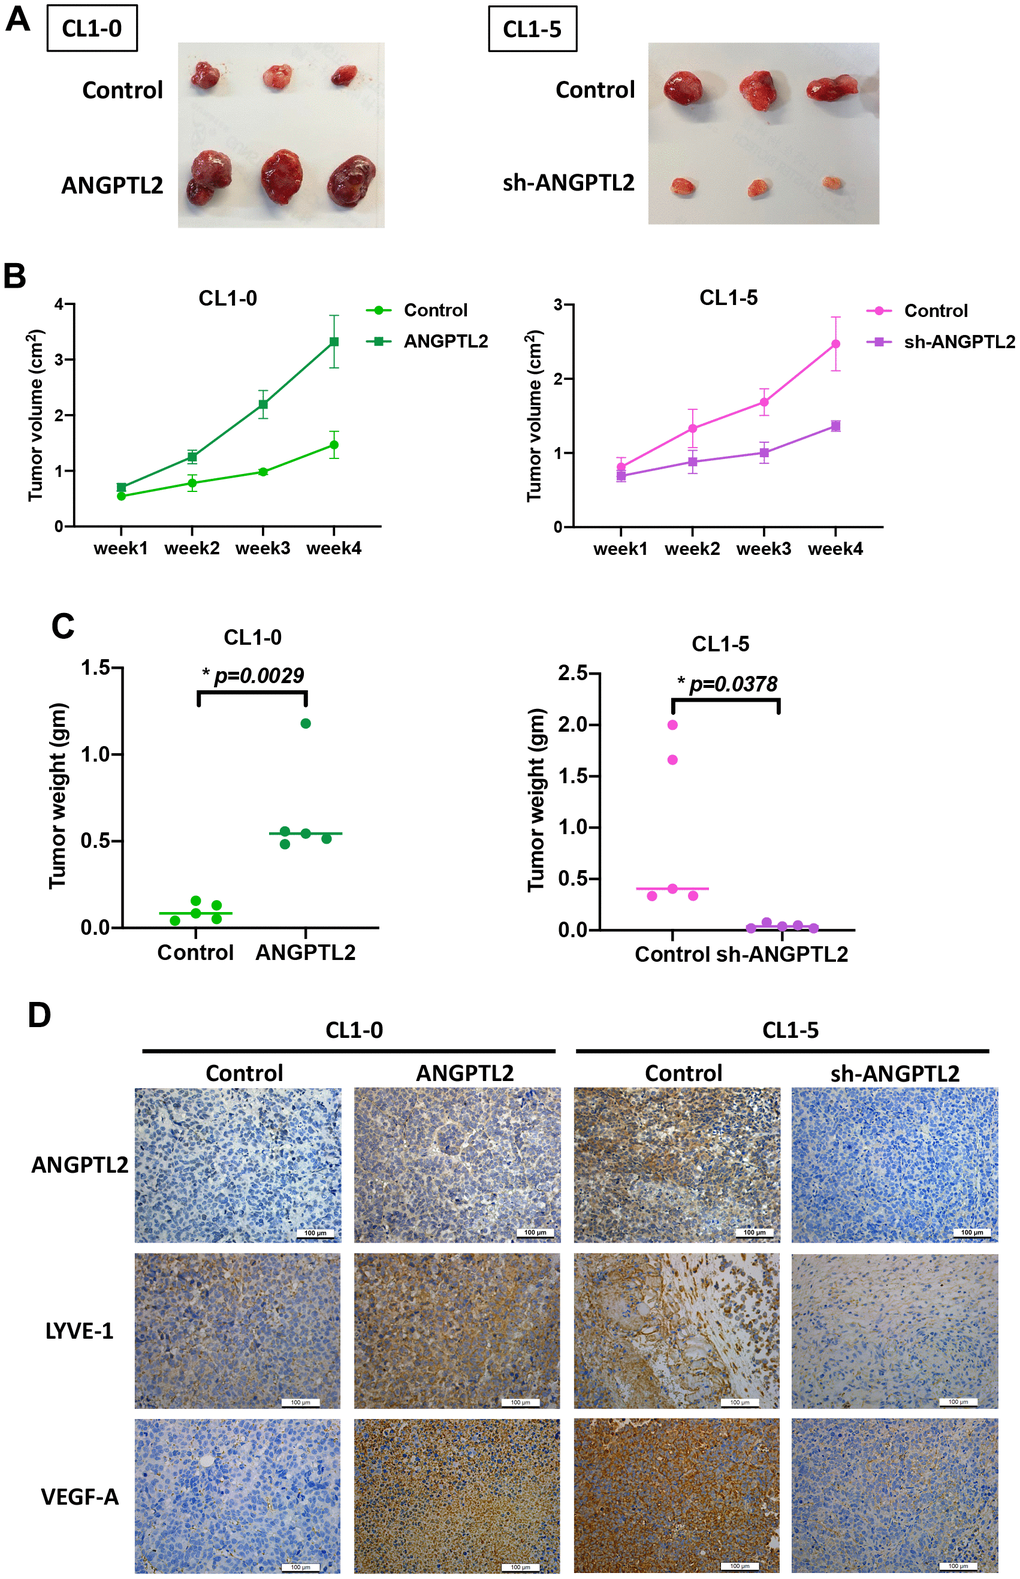 ANGPTL2 promotes tumor growth and lymphangiogenesis in vivo. (A–C) CL1-0 and CL1-5 cells were subcutaneously injected into the right flanks of BALB/c-nu mice. Four weeks later, the mice were sacrificed and the tumors were excised and weighed (n=5). (D) Tumor sections were immunostained using ANGPTL2, LYVE-1 and VEGF-A antibodies. *p 